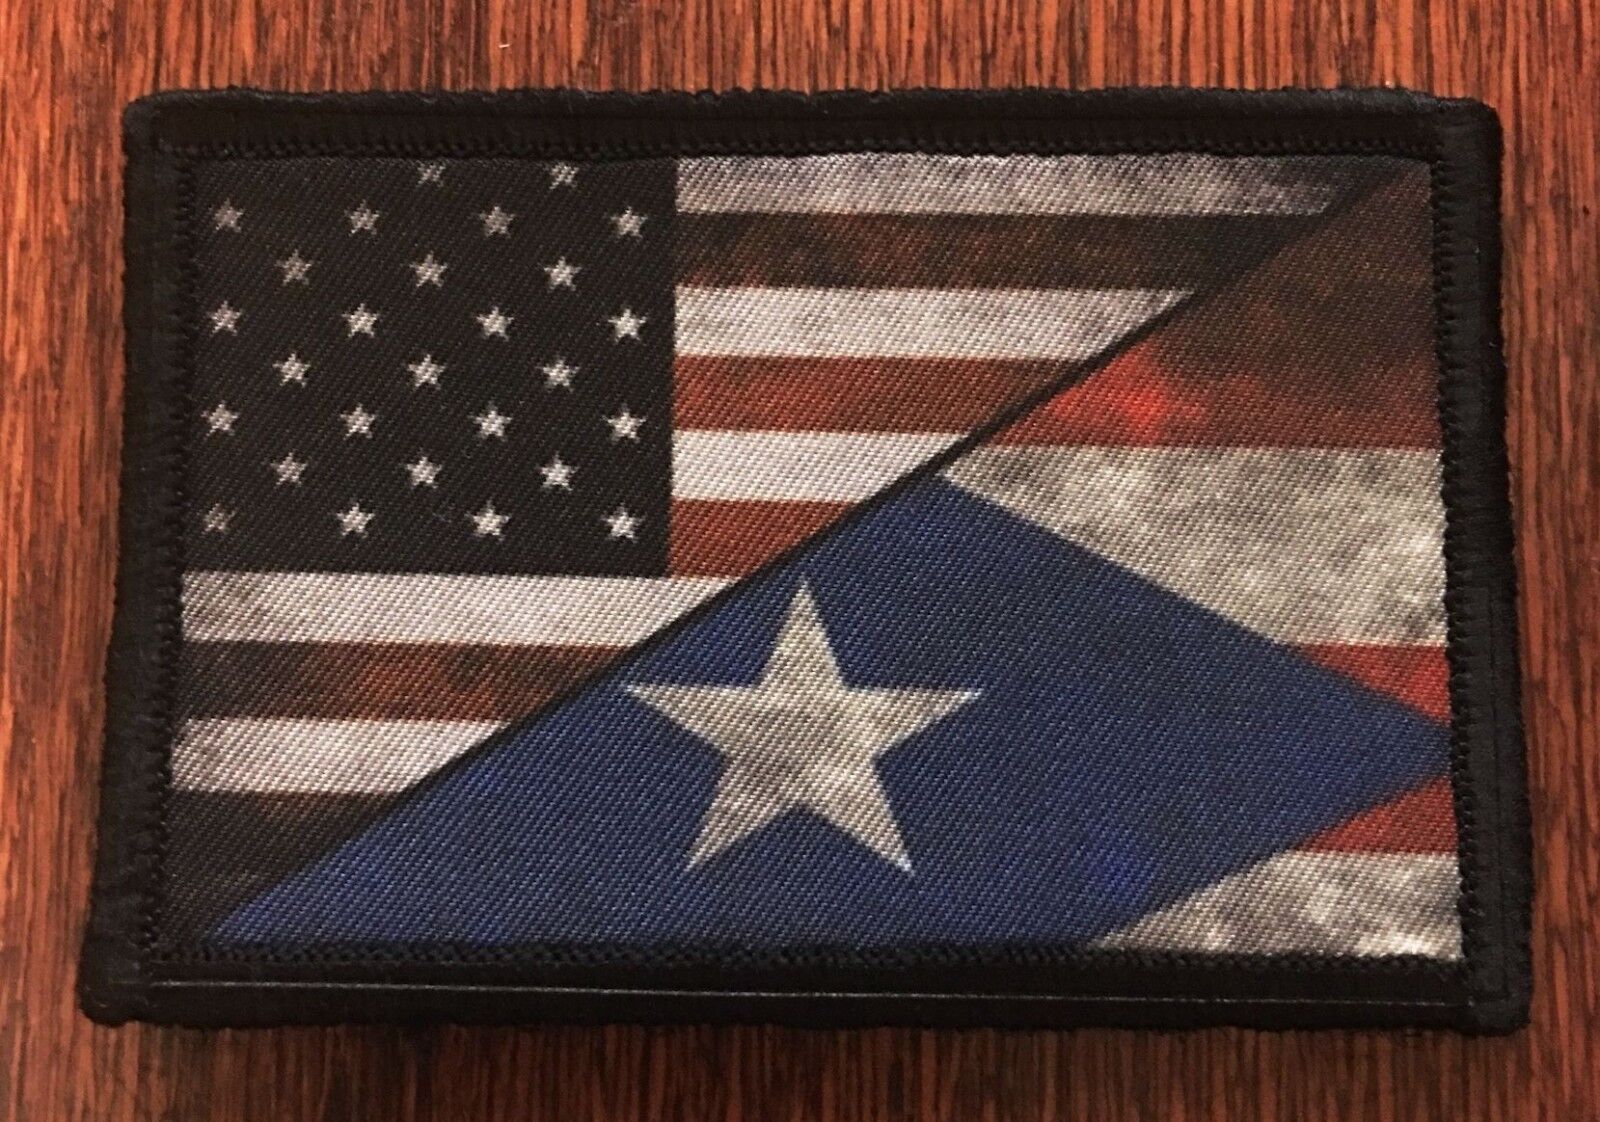 USA Puerto Rico Flag Morale Patch Military Tactical Army Badge Hook Tab